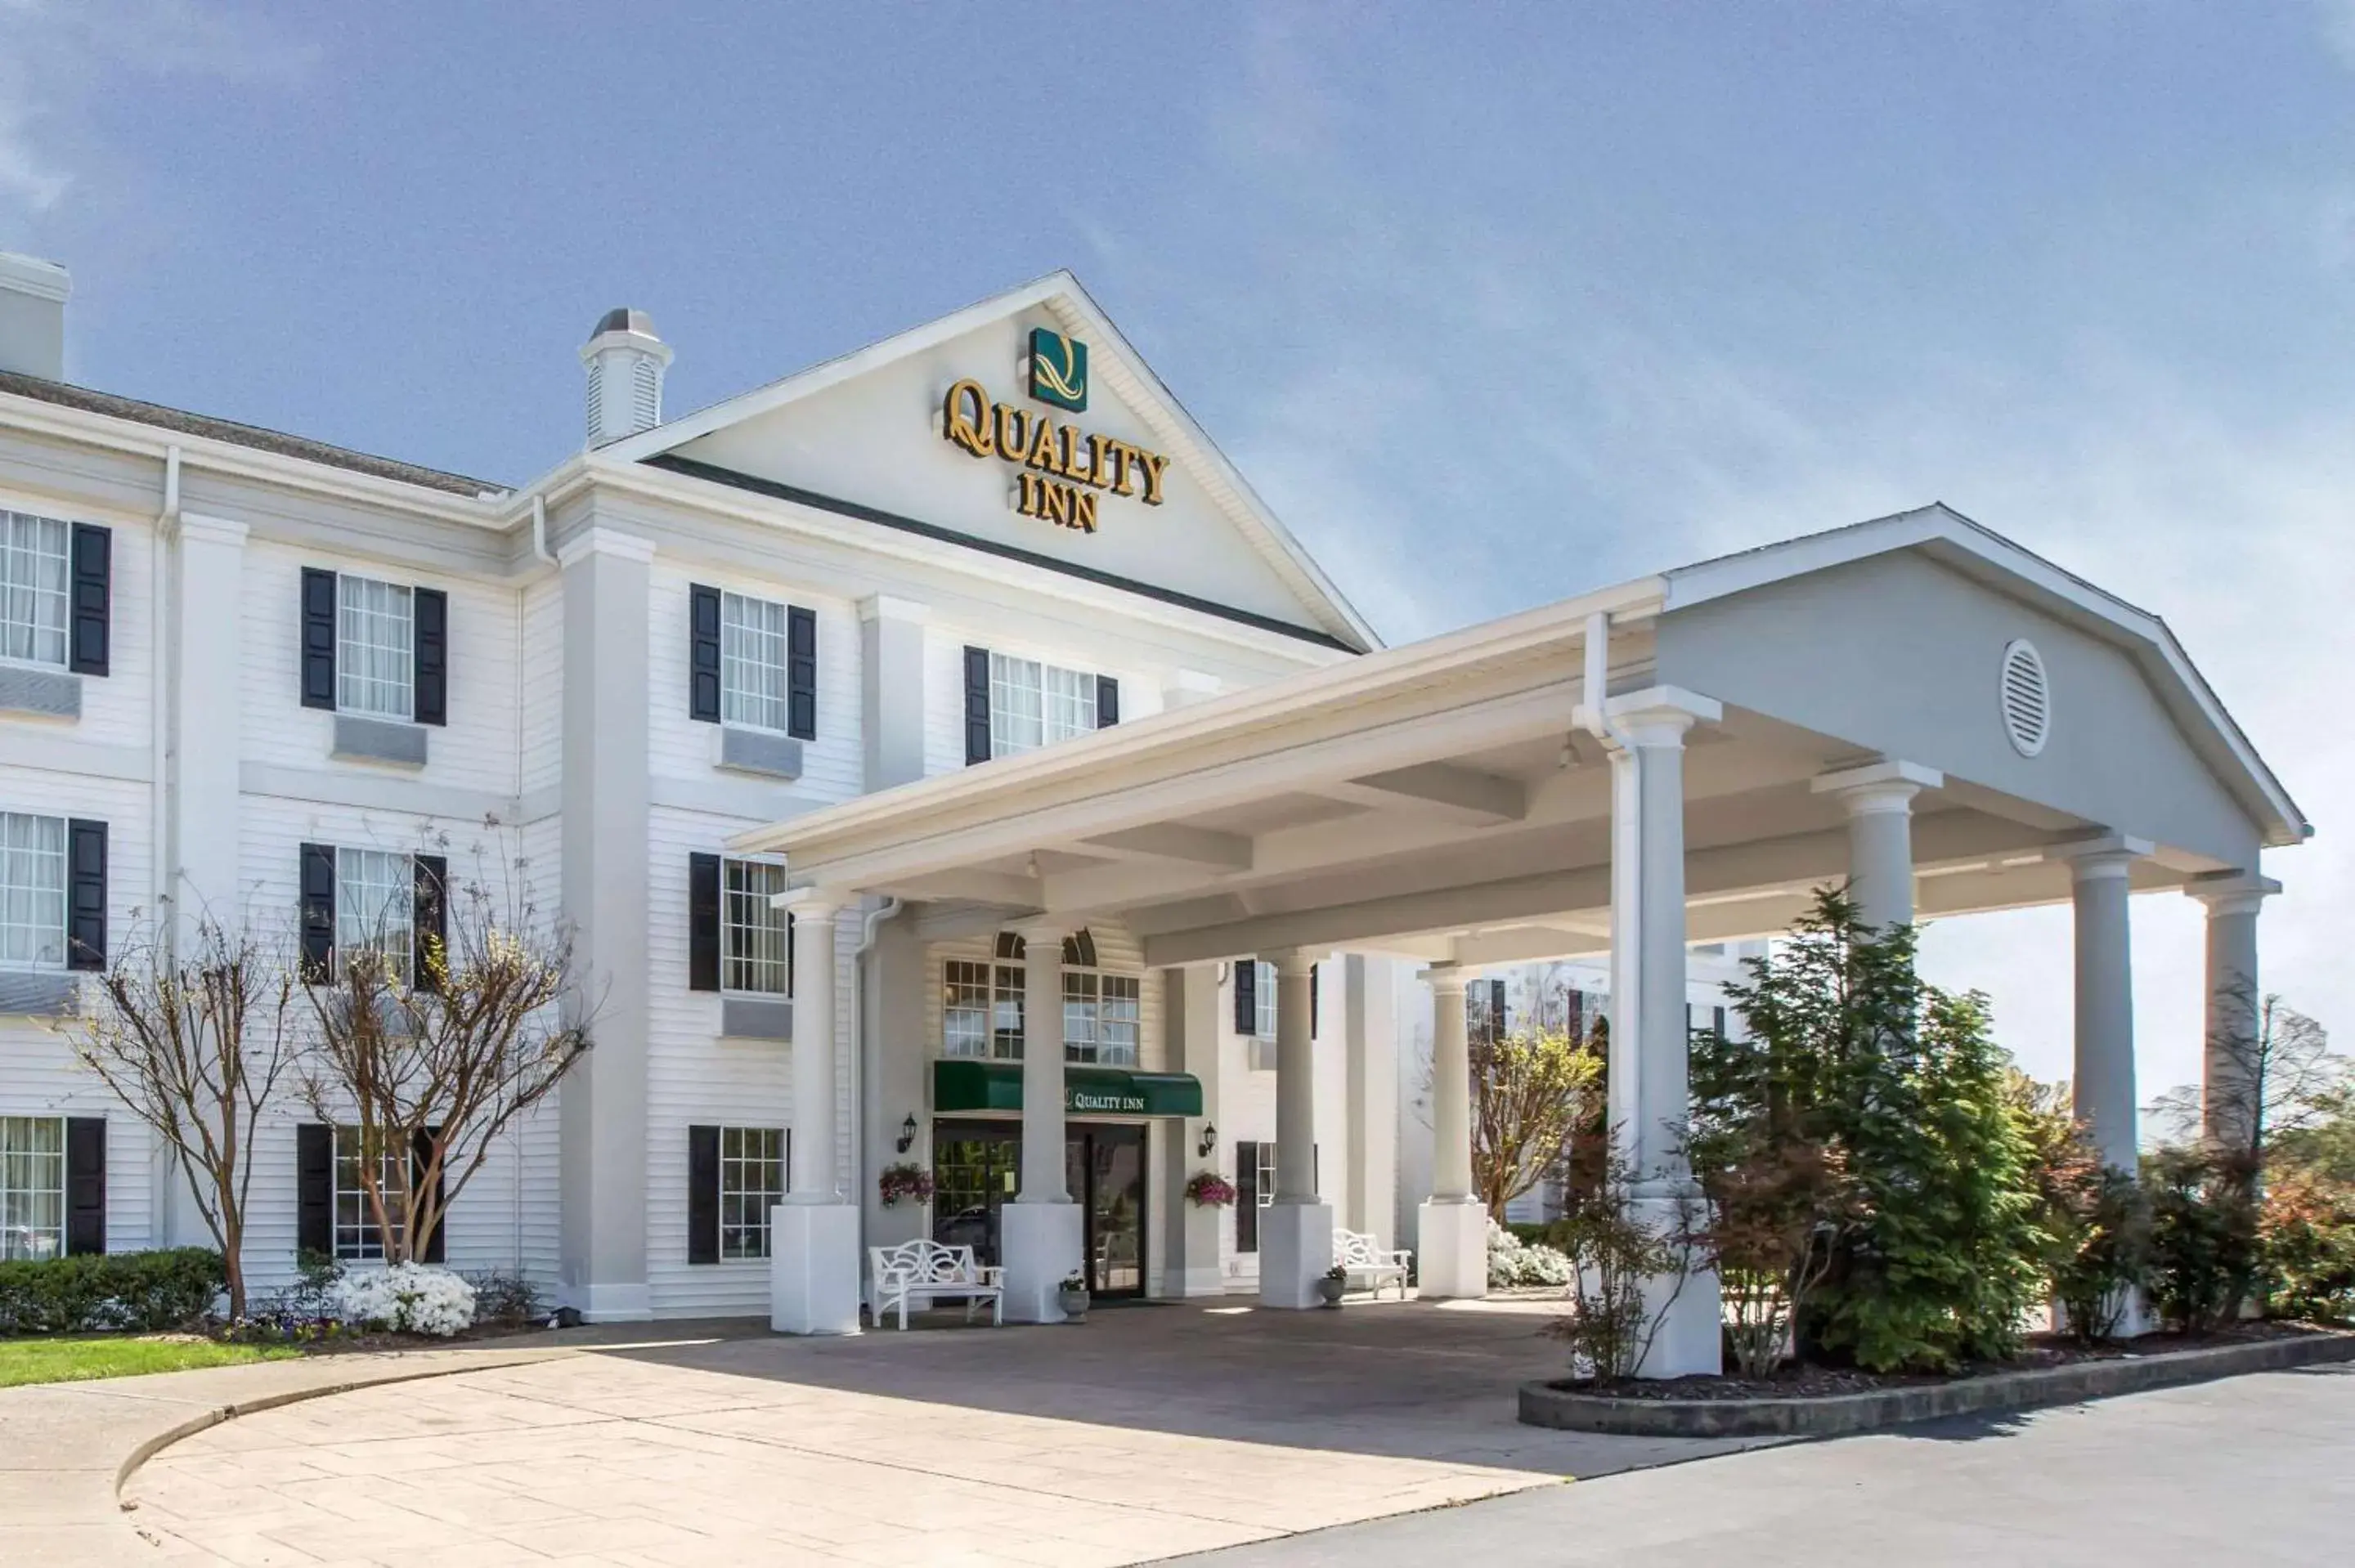 Property building in Quality Inn Greeneville